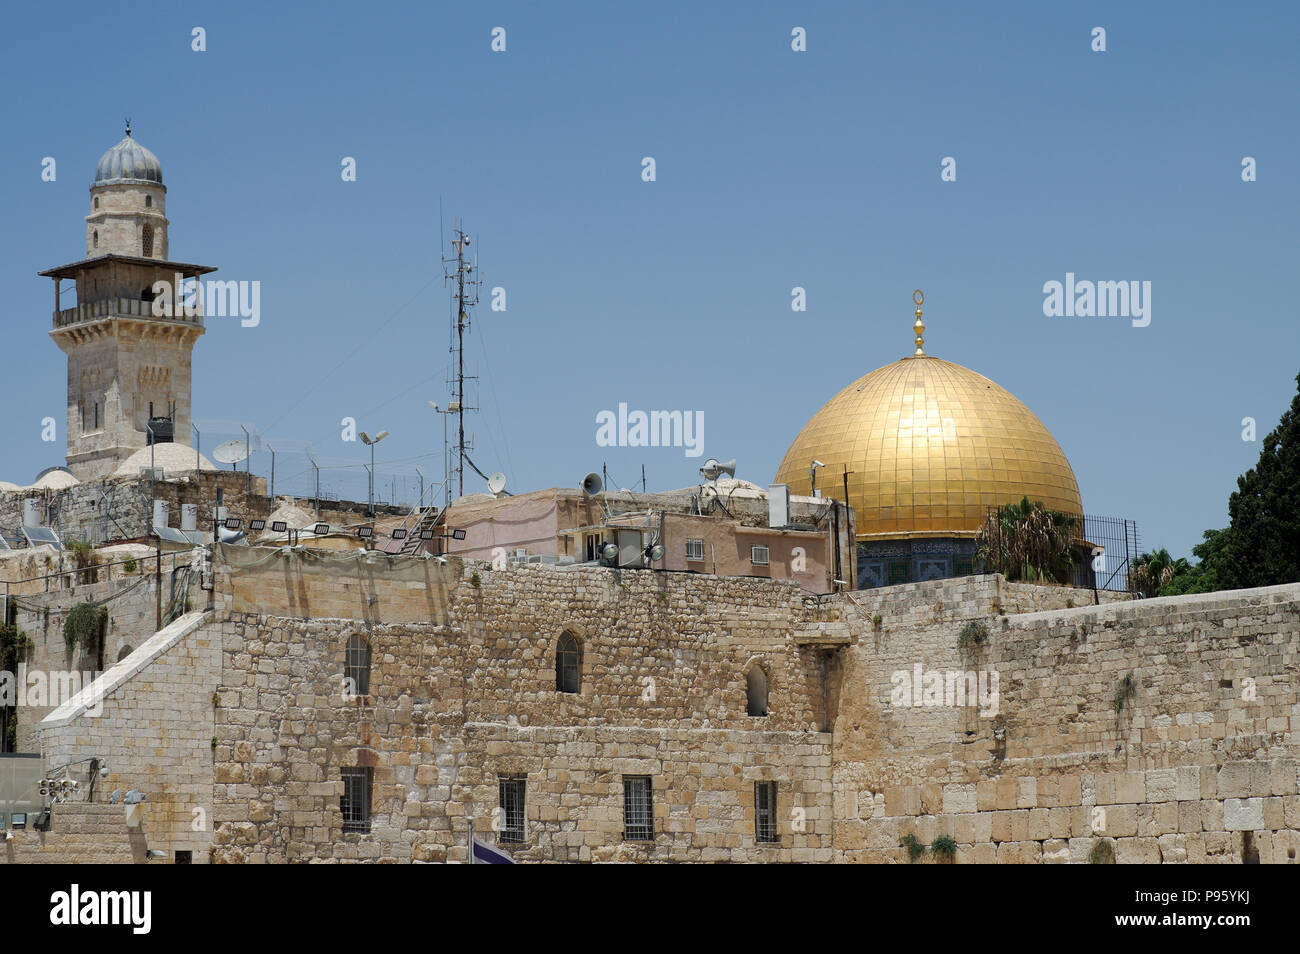 The iconic Dome of the Rock and Bab al-Silsila Minaret basking in the afternoon sun - Jerusalem, Israel Stock Photo